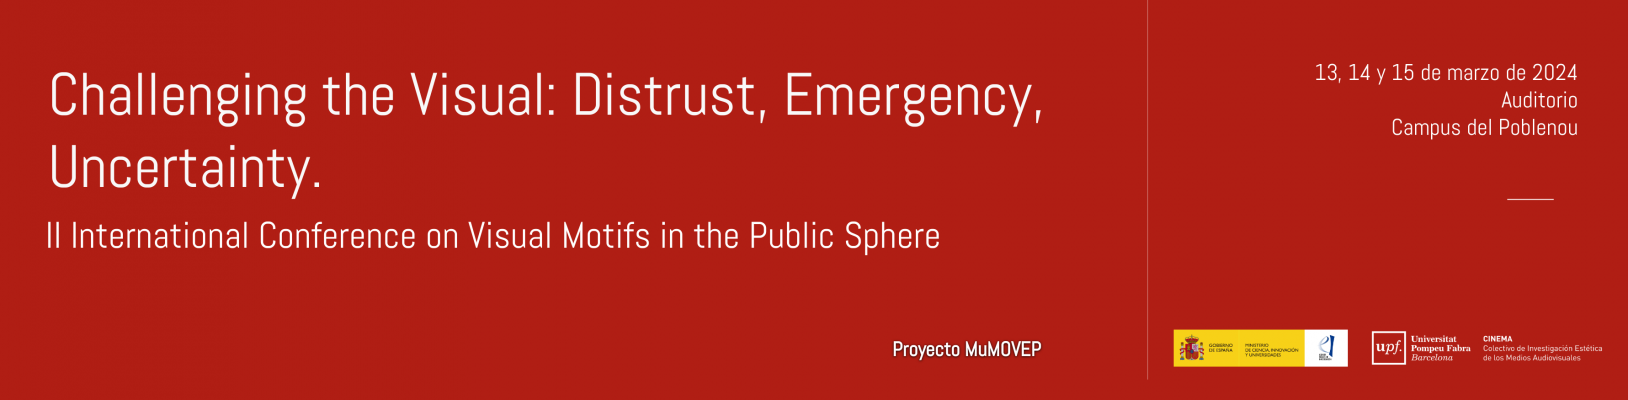 Call for communications: Challenging the Visual: Distrust, Emergency, Uncertainty. II International Conference on Visual Motifs in the Public Sphere